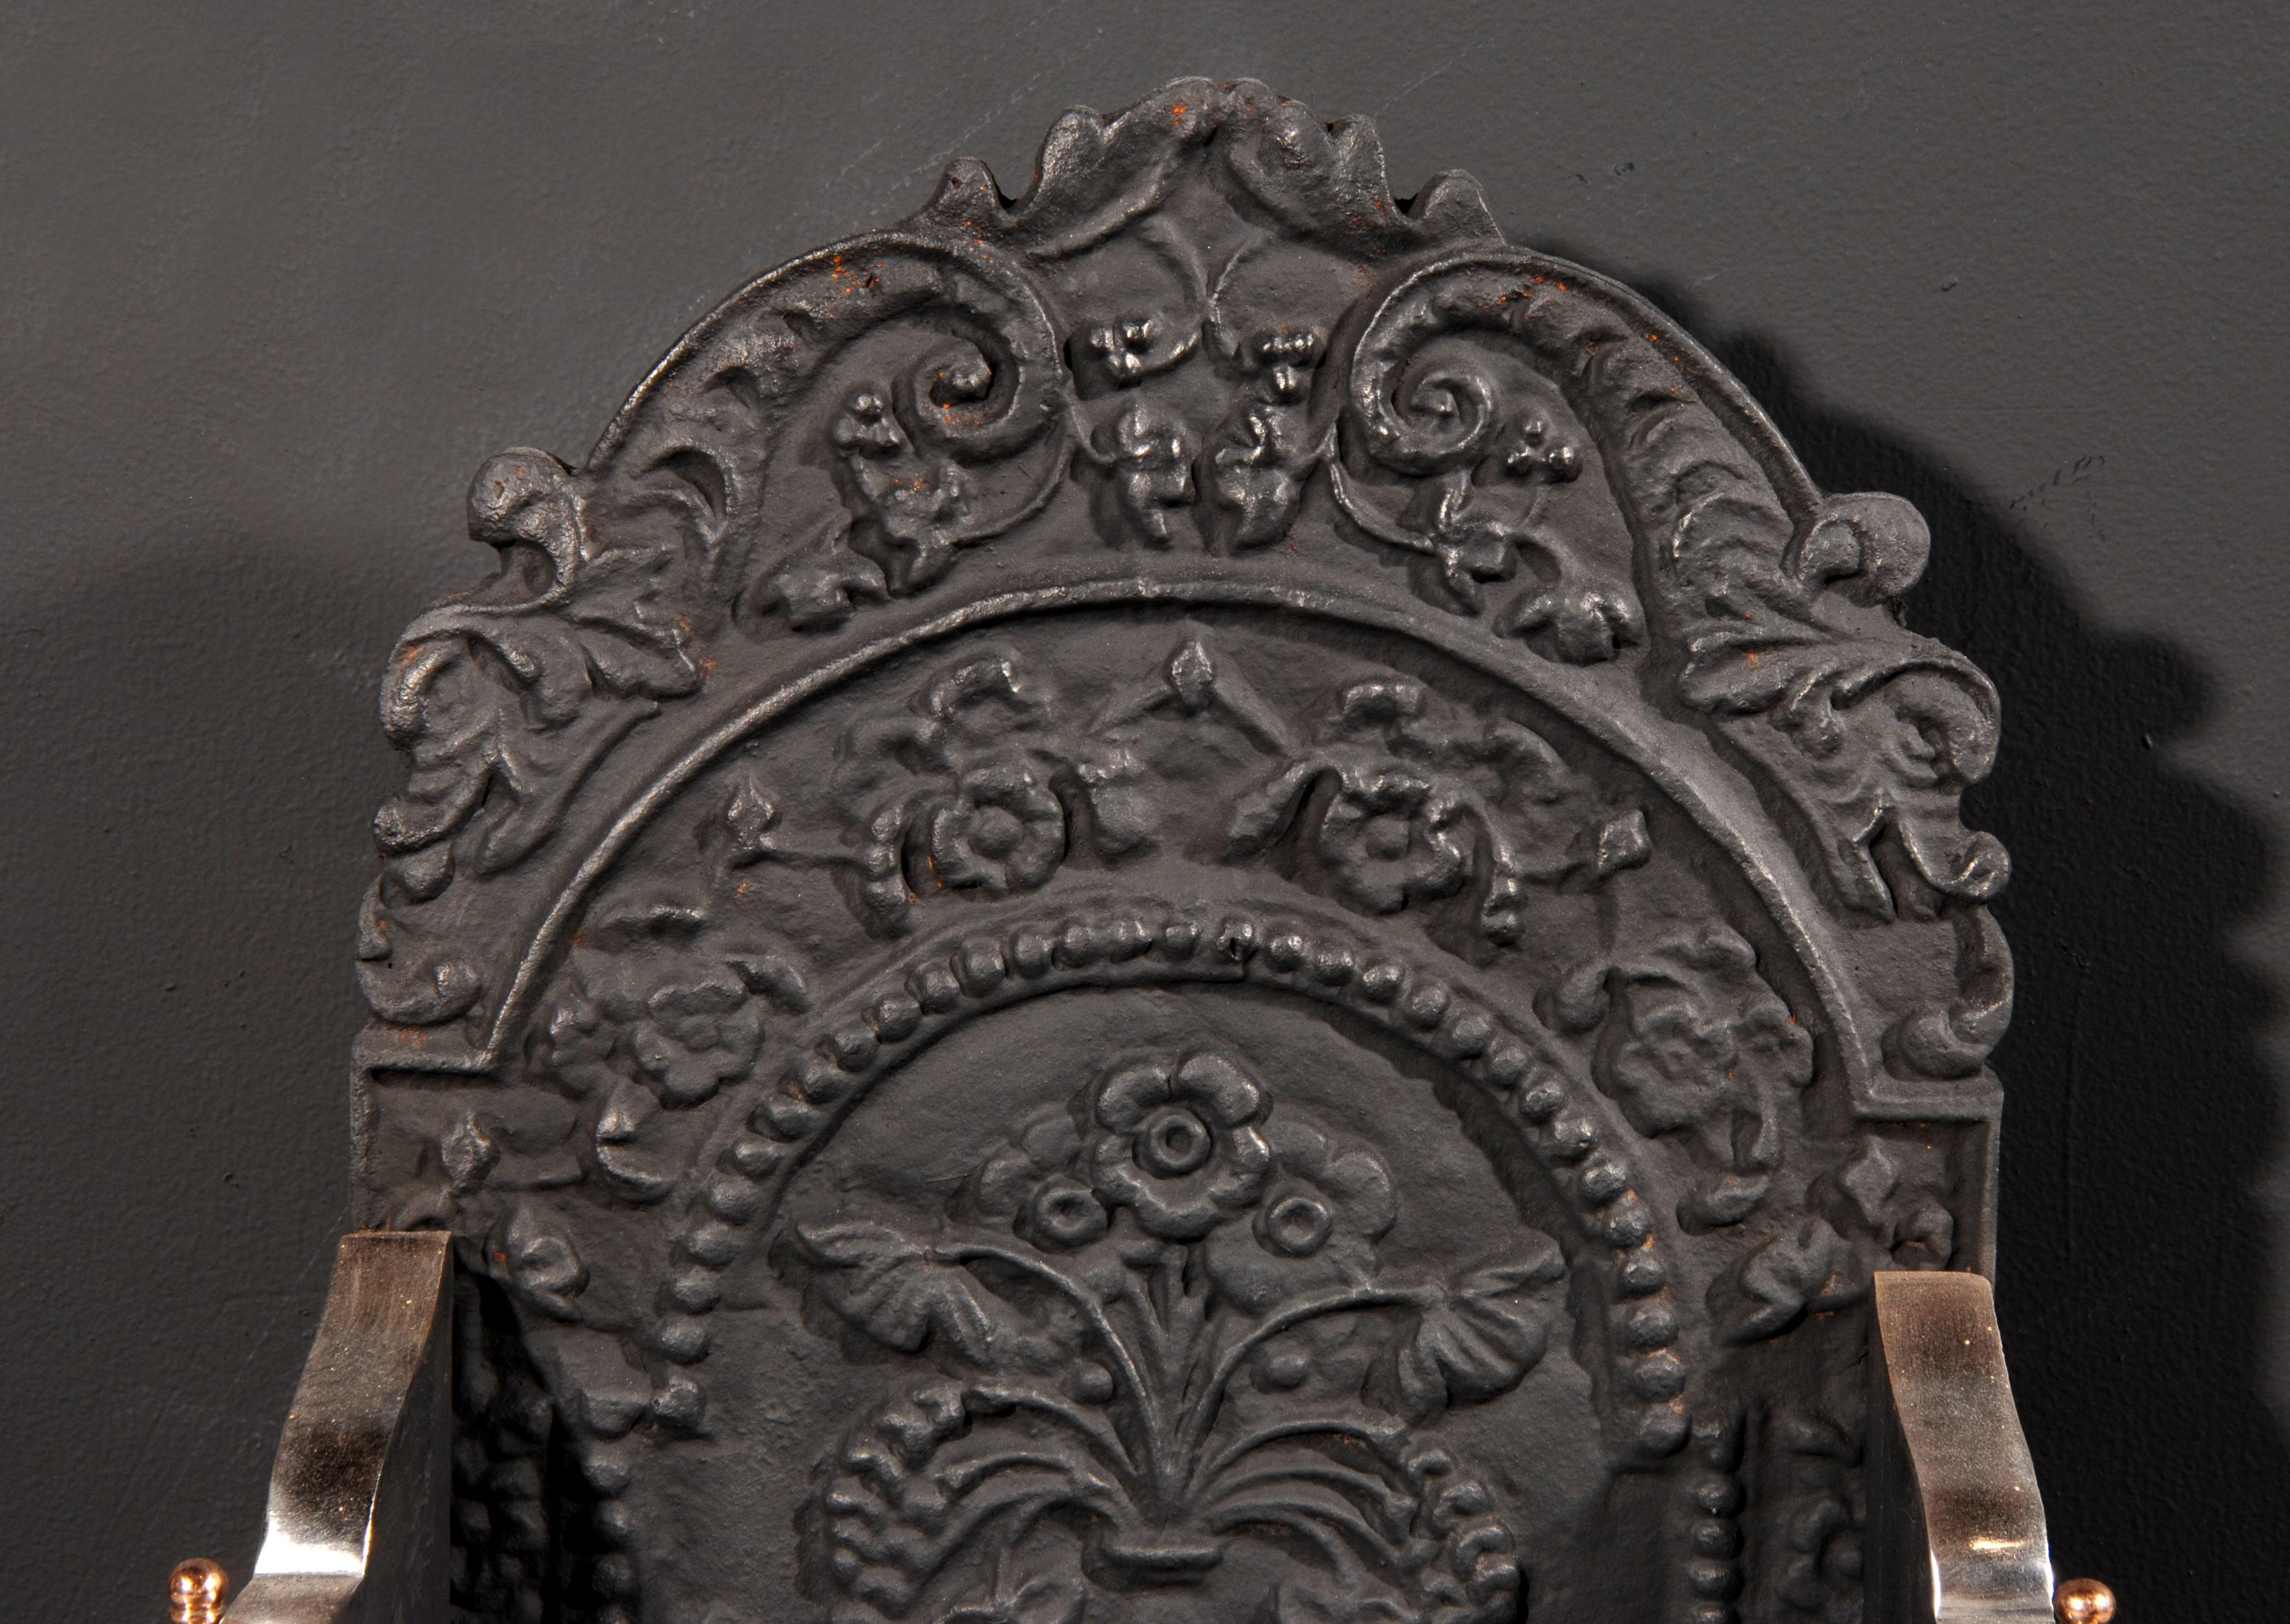 Fine quality Georgian style dog-grate in unusual enriched gunmetal, with engraved paterae to fluted fret, and engraved legs and wings. Cast shaped decorative back of floral design, early 20th century. In the manner of Thomas Elsley.

Measures: Width